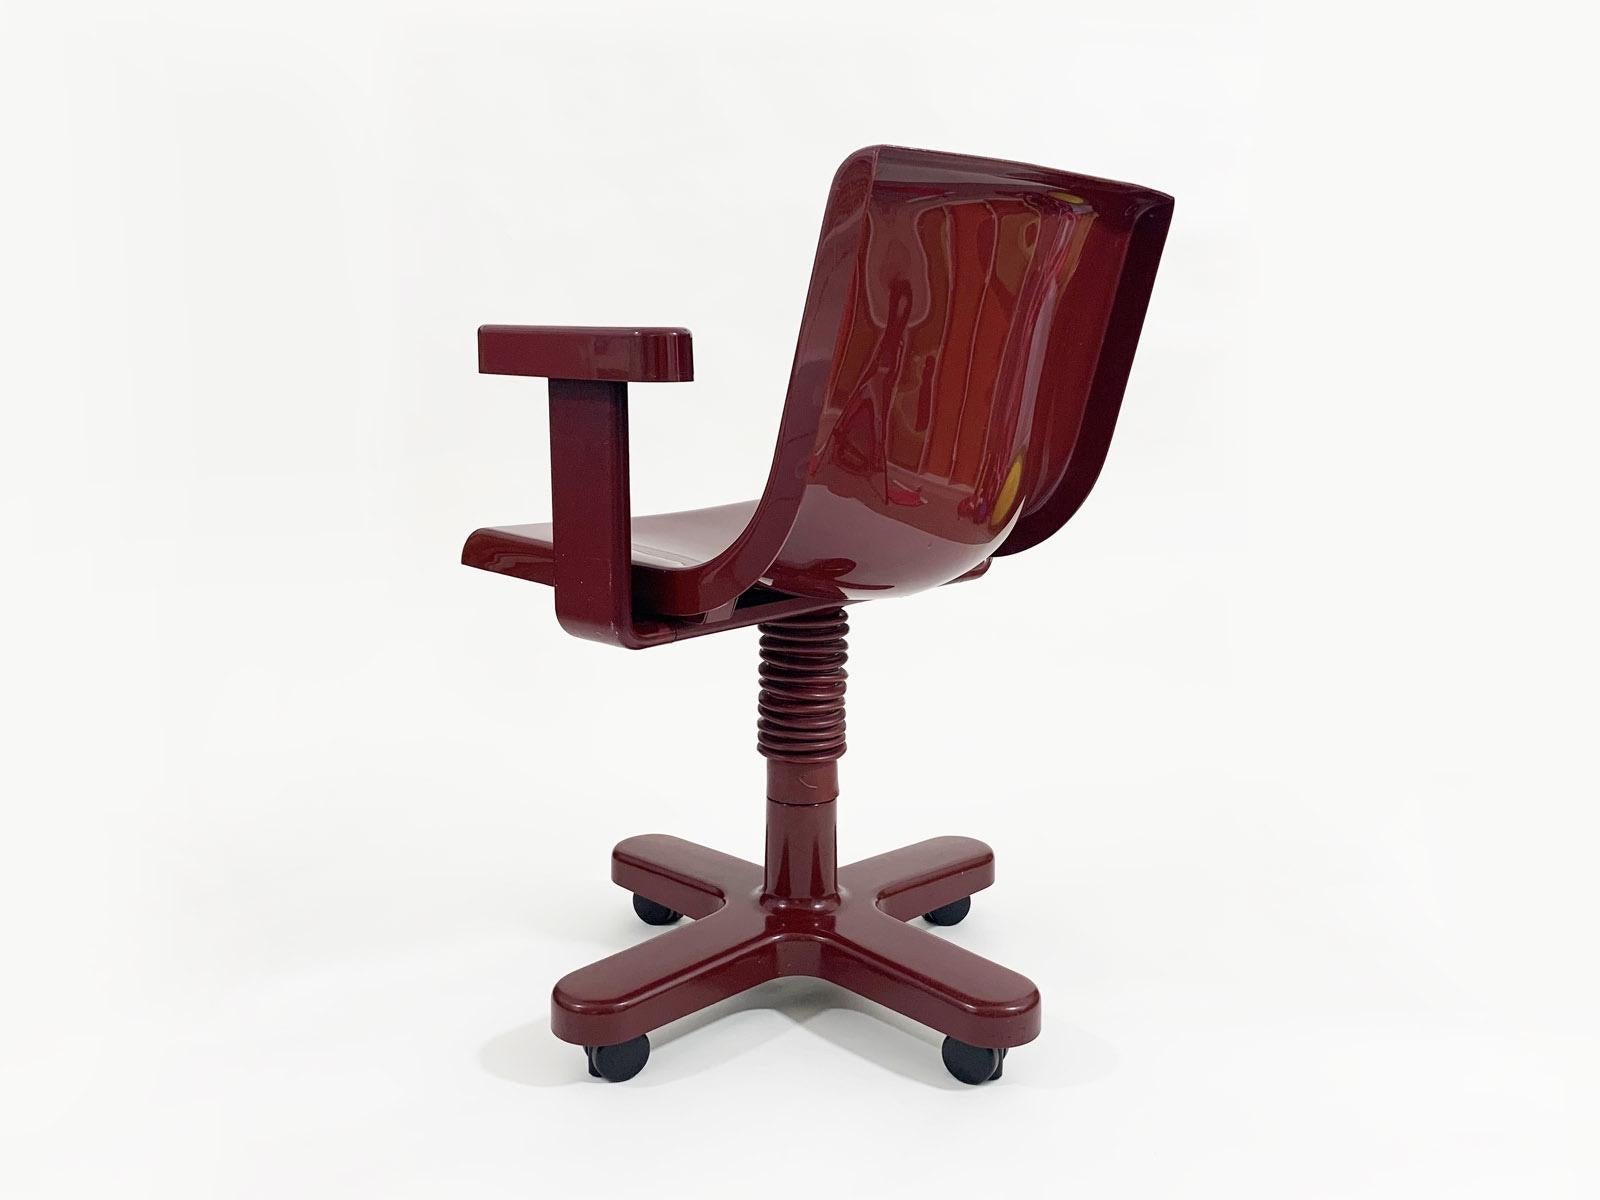 Italian Ettore Sottsass Synthesis Desk Chair, Olivetti, Italy, 1973 For Sale